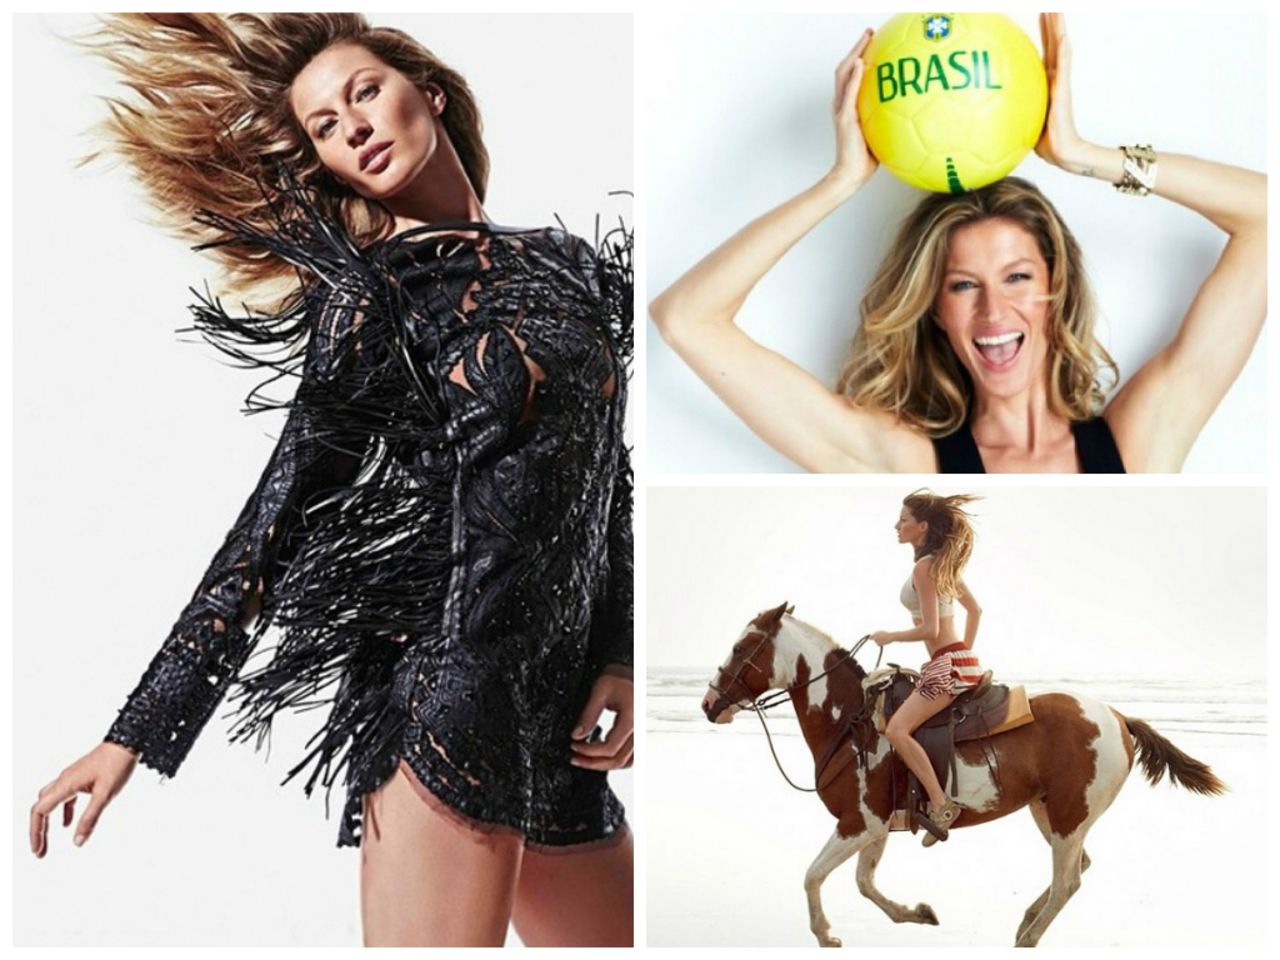 <strong>4. Gisele Bündchen, Model</strong><br /><a href="http://instagram.com/giseleofficial" target="_blank" target="_blank"><strong>Instagram </strong></a><strong>followers:</strong> 2,855,343<br /><a href="https://twitter.com/giseleofficial" target="_blank" target="_blank"><strong>Twitter</strong></a><strong> followers: </strong>1,930,000<br /><strong>Credits:</strong> Vanity Fair, Marc Jacobs, Chane<br /><strong>Posts: </strong>Babies, tributes to Brazil and yoga poses. 